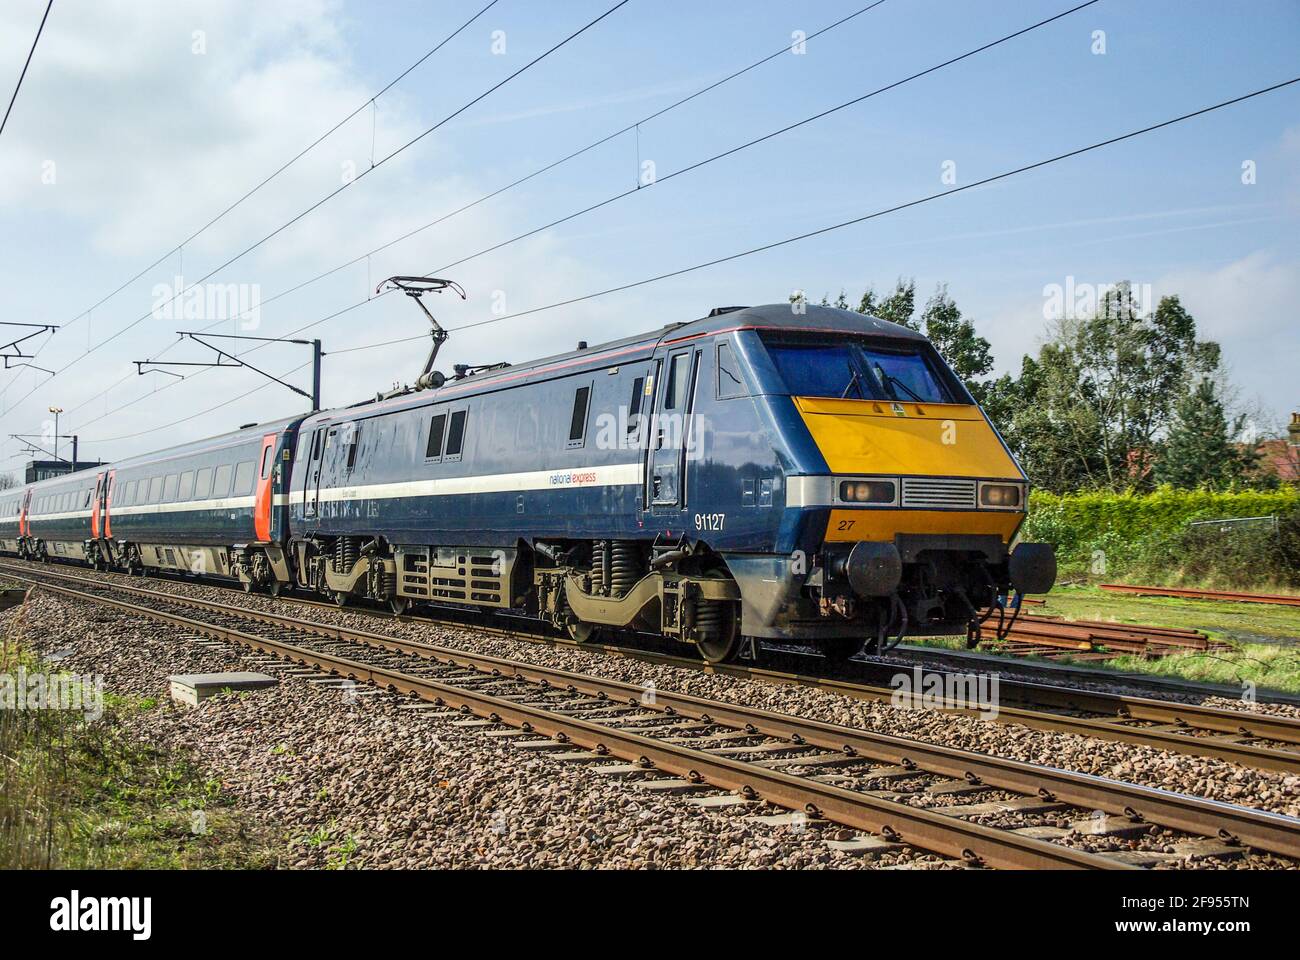 National Express East Coast main line high speed train passing Holme, Peterborough, Cambridge, UK. Class 91 electric multiple unit. Electrified line Stock Photo